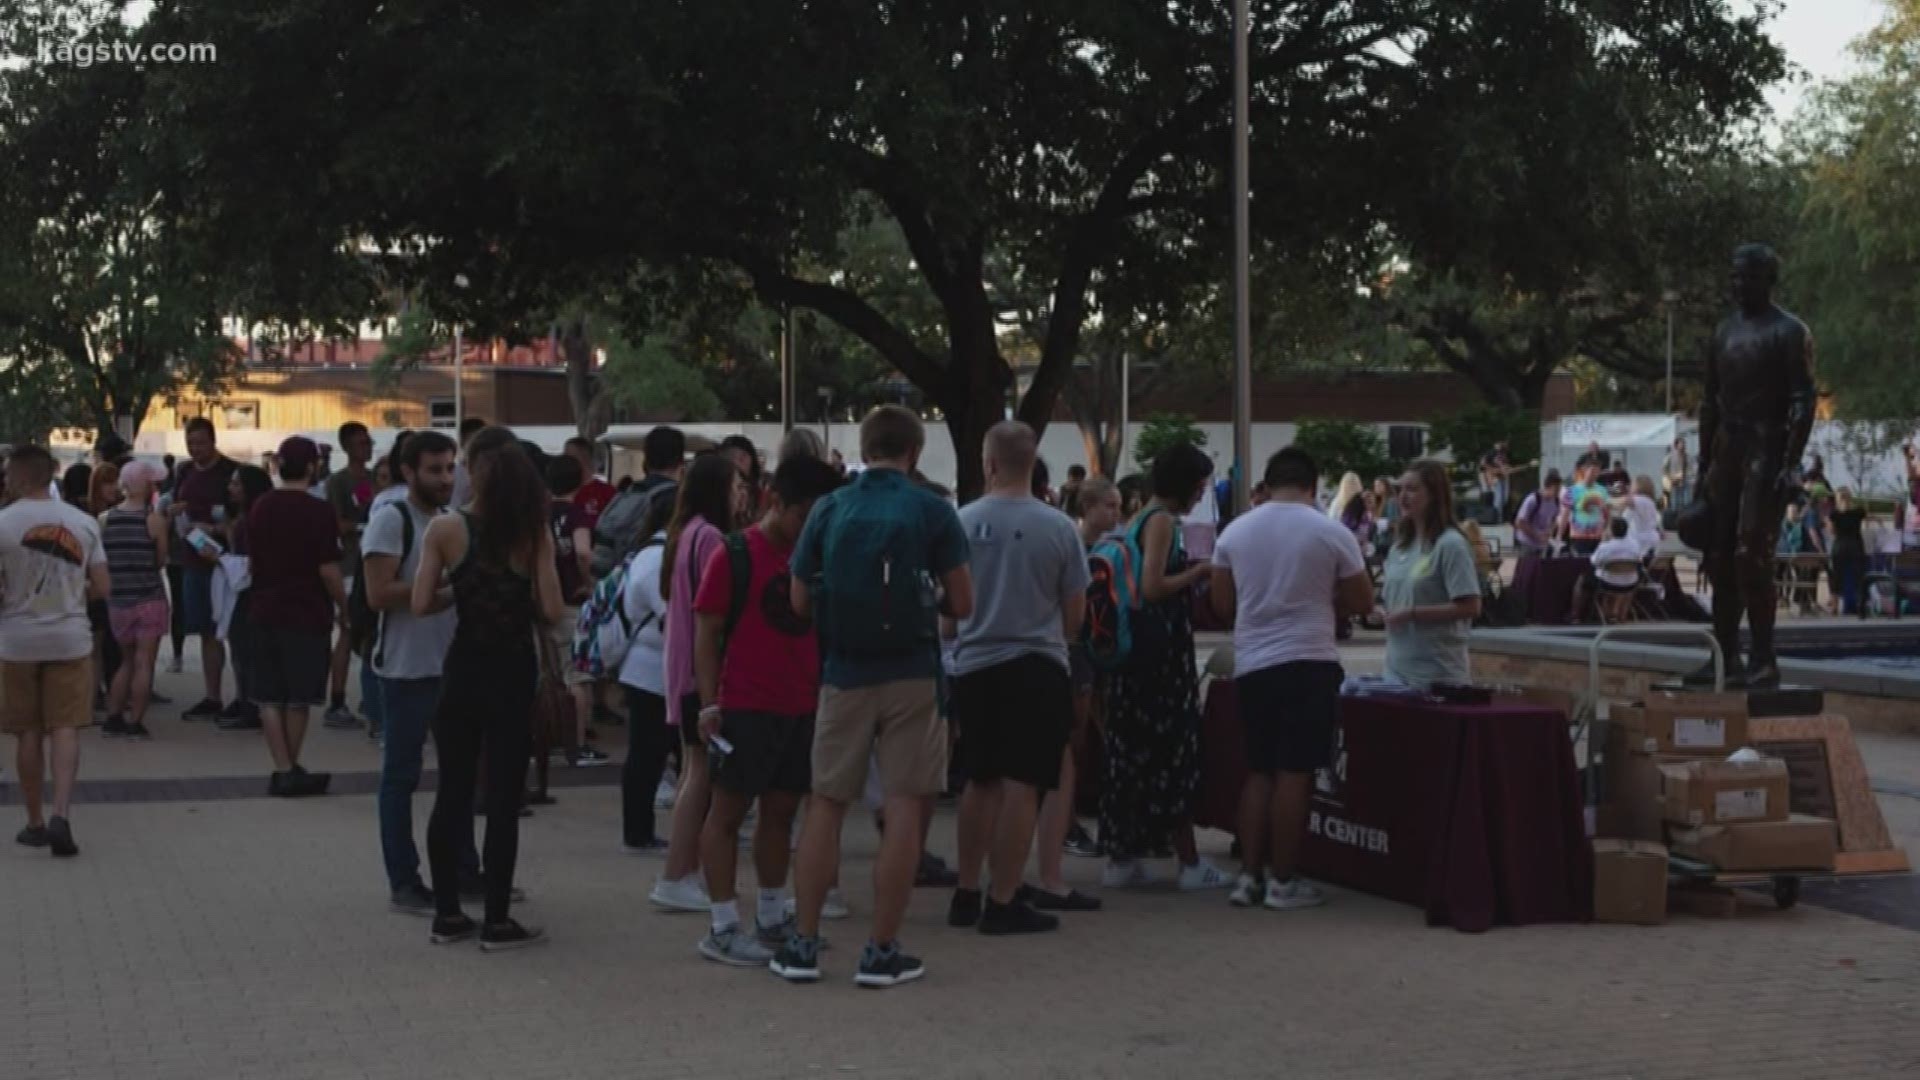 The Counseling & Psychological Services department at A&M hosted their Third Annual "Not Another Aggie" Suicide Awareness Walk on Tuesday.